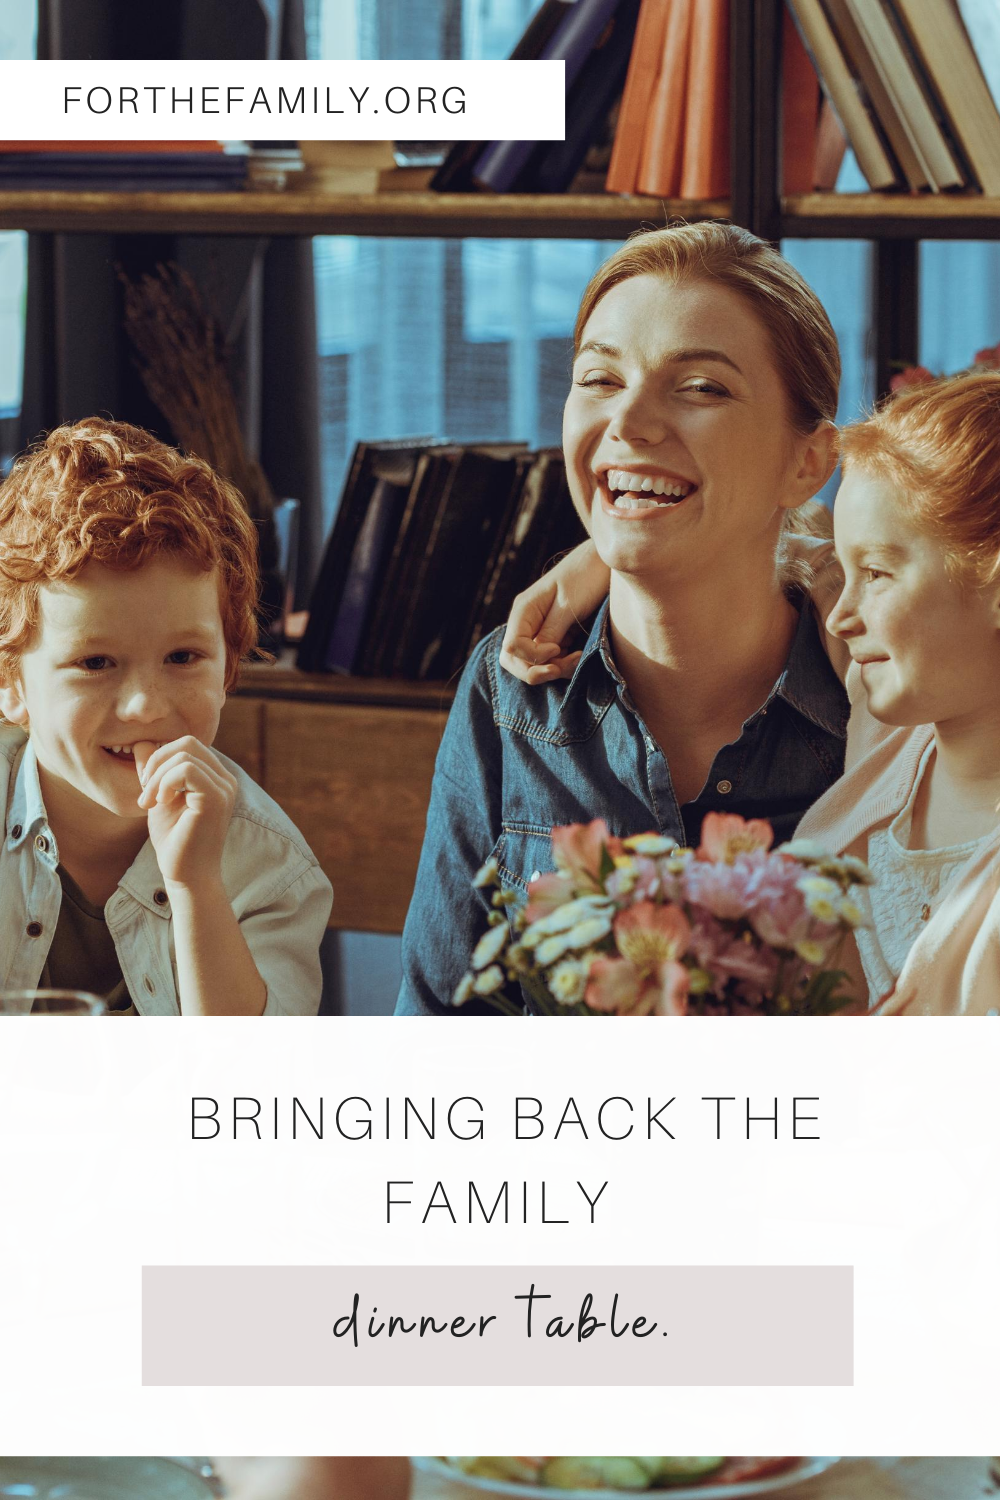 During this time we are all missing community, but we have an opportunity to build that community within our family! Amidst these tough circumstances, we can enjoy the slower pace of life that has been gifted to us by bringing back the family dinner table.